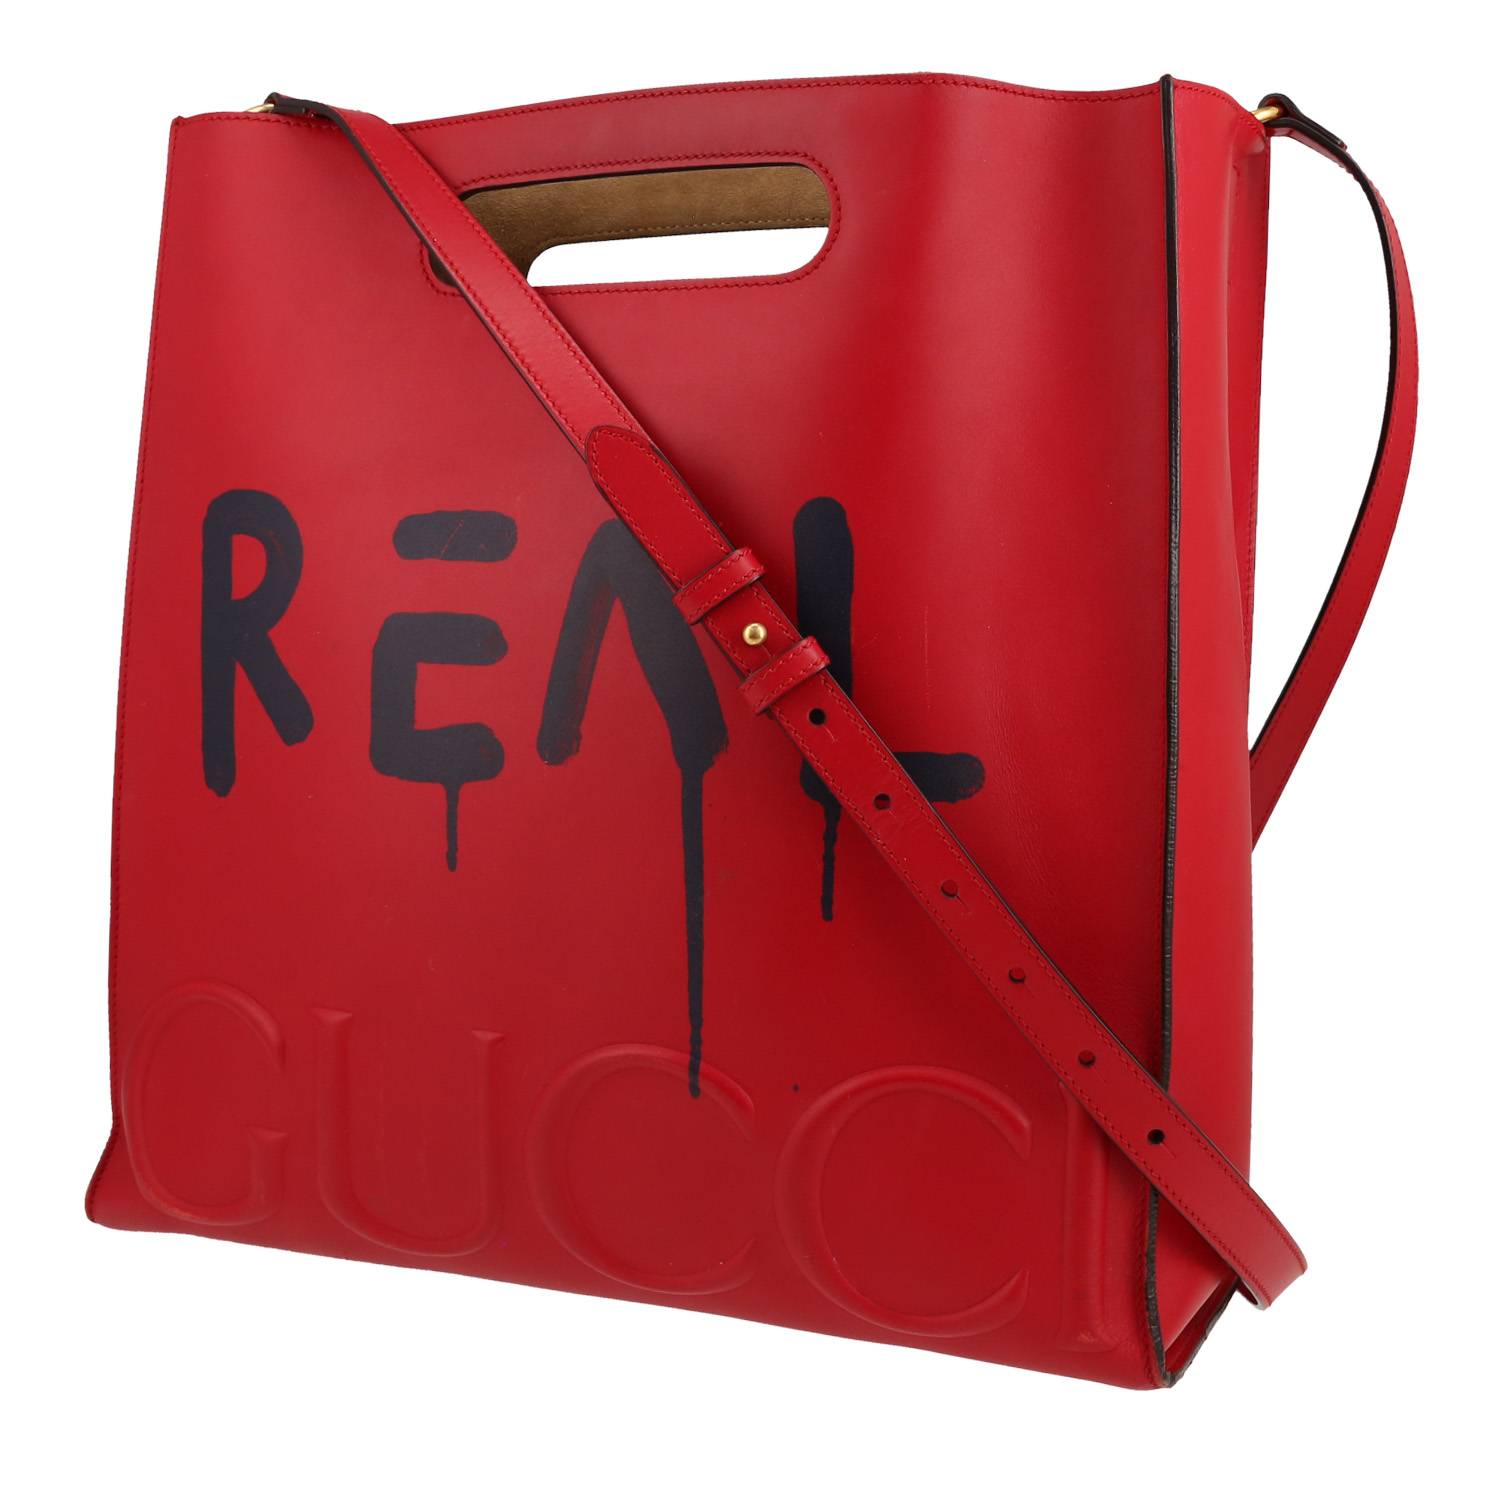 Shopping Bag In And Black Leather